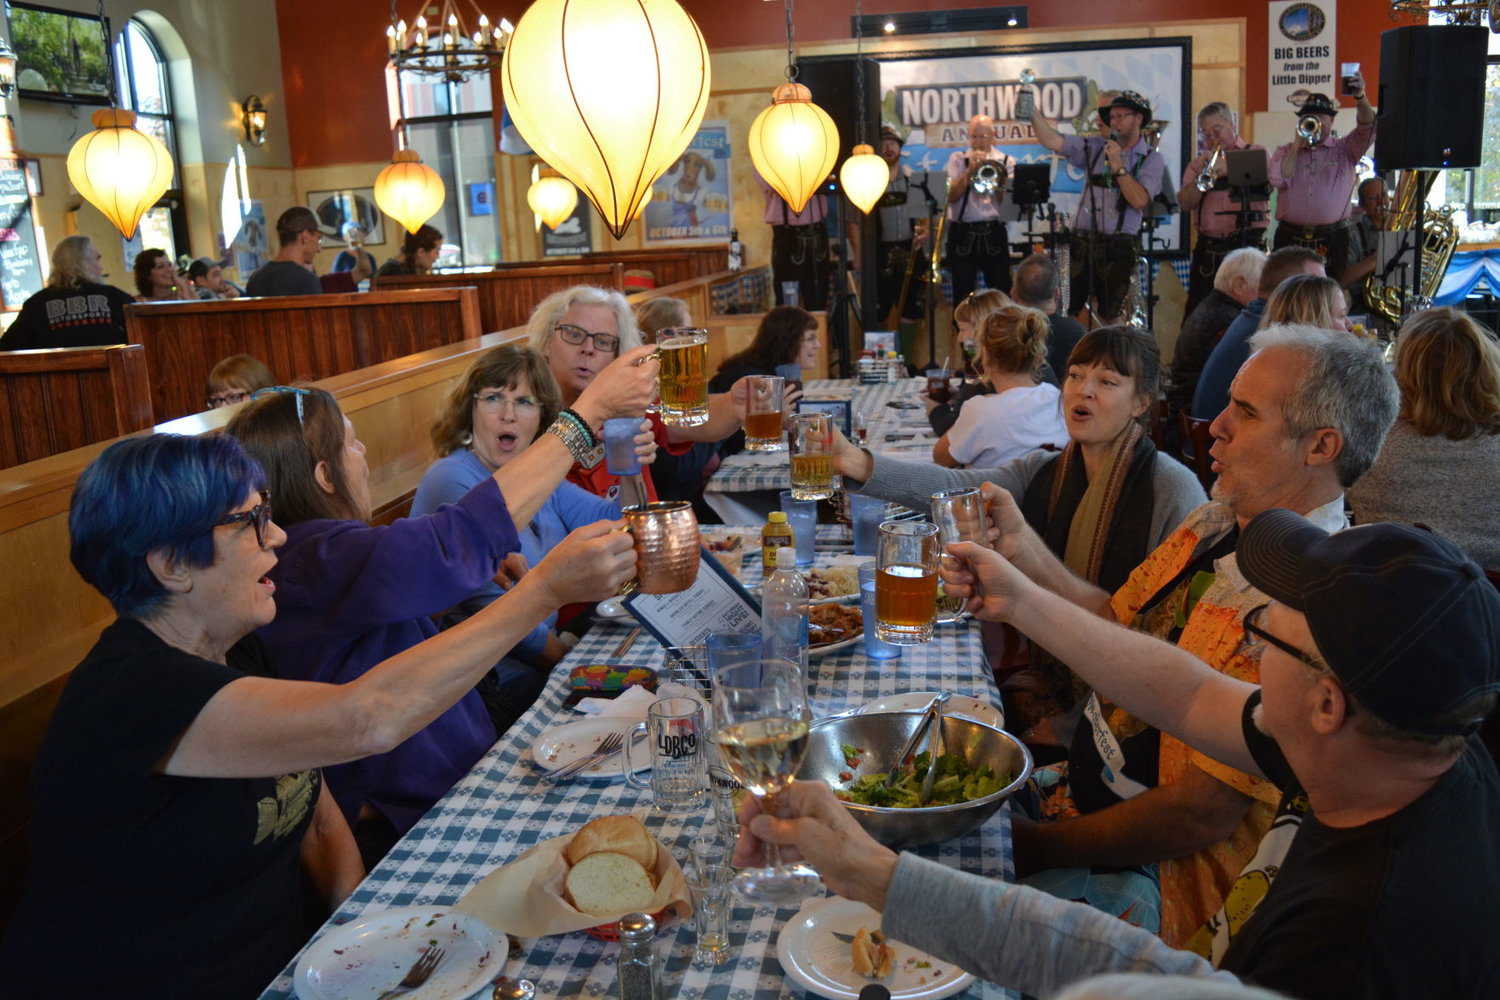 Glasses were raised high as Festival Brass played traditional drinking tunes at Oktoberfest at Northwood Public House in 2019